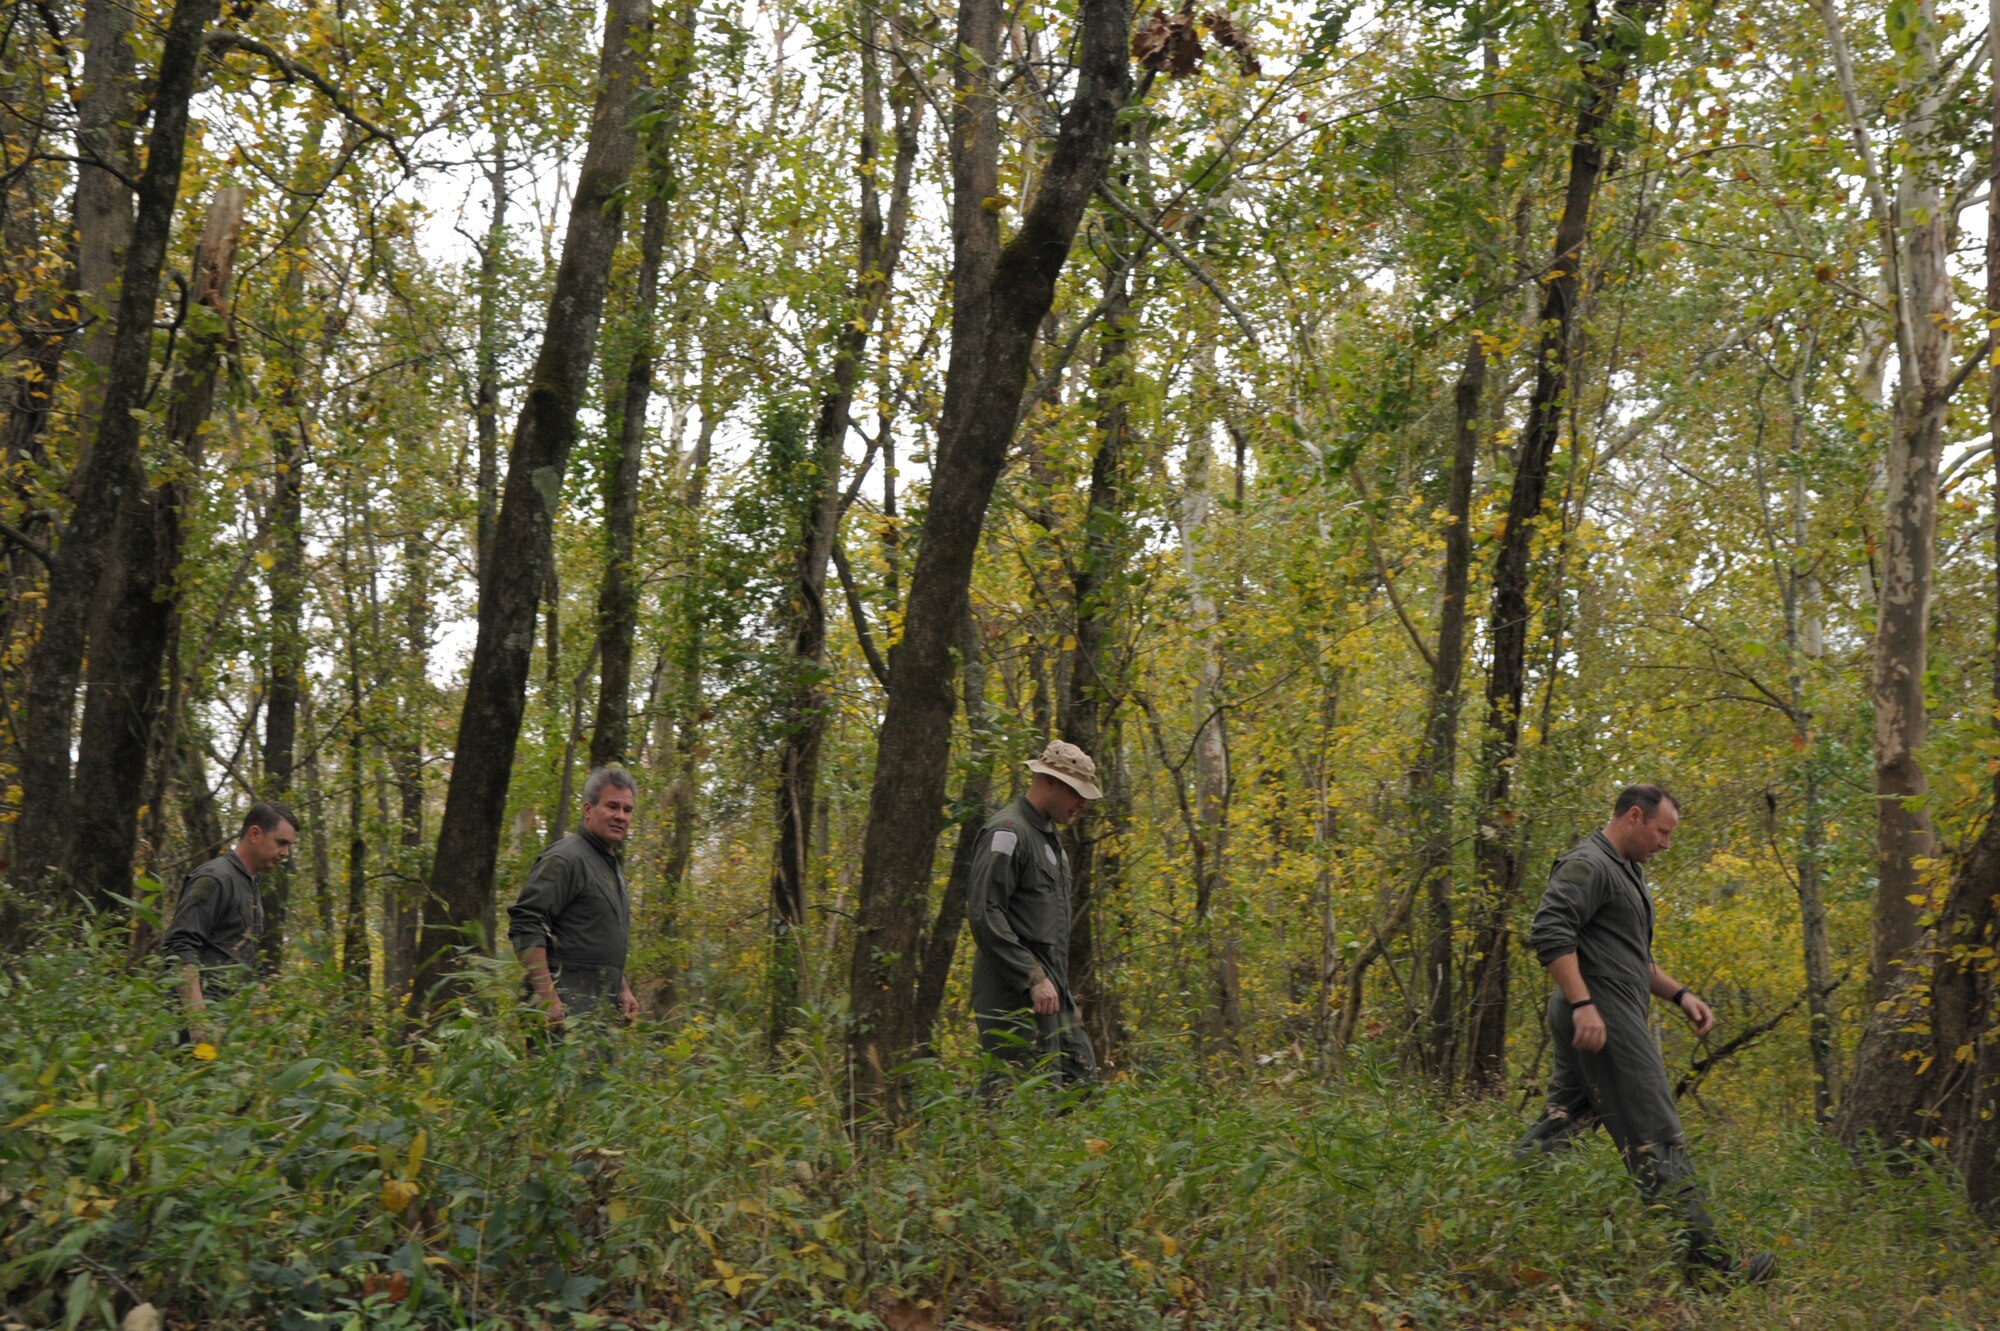 Members of the 908th Operations Group walk through the woods Nov. 8, 2020, at Maxwell Air Force Base, Alabama.